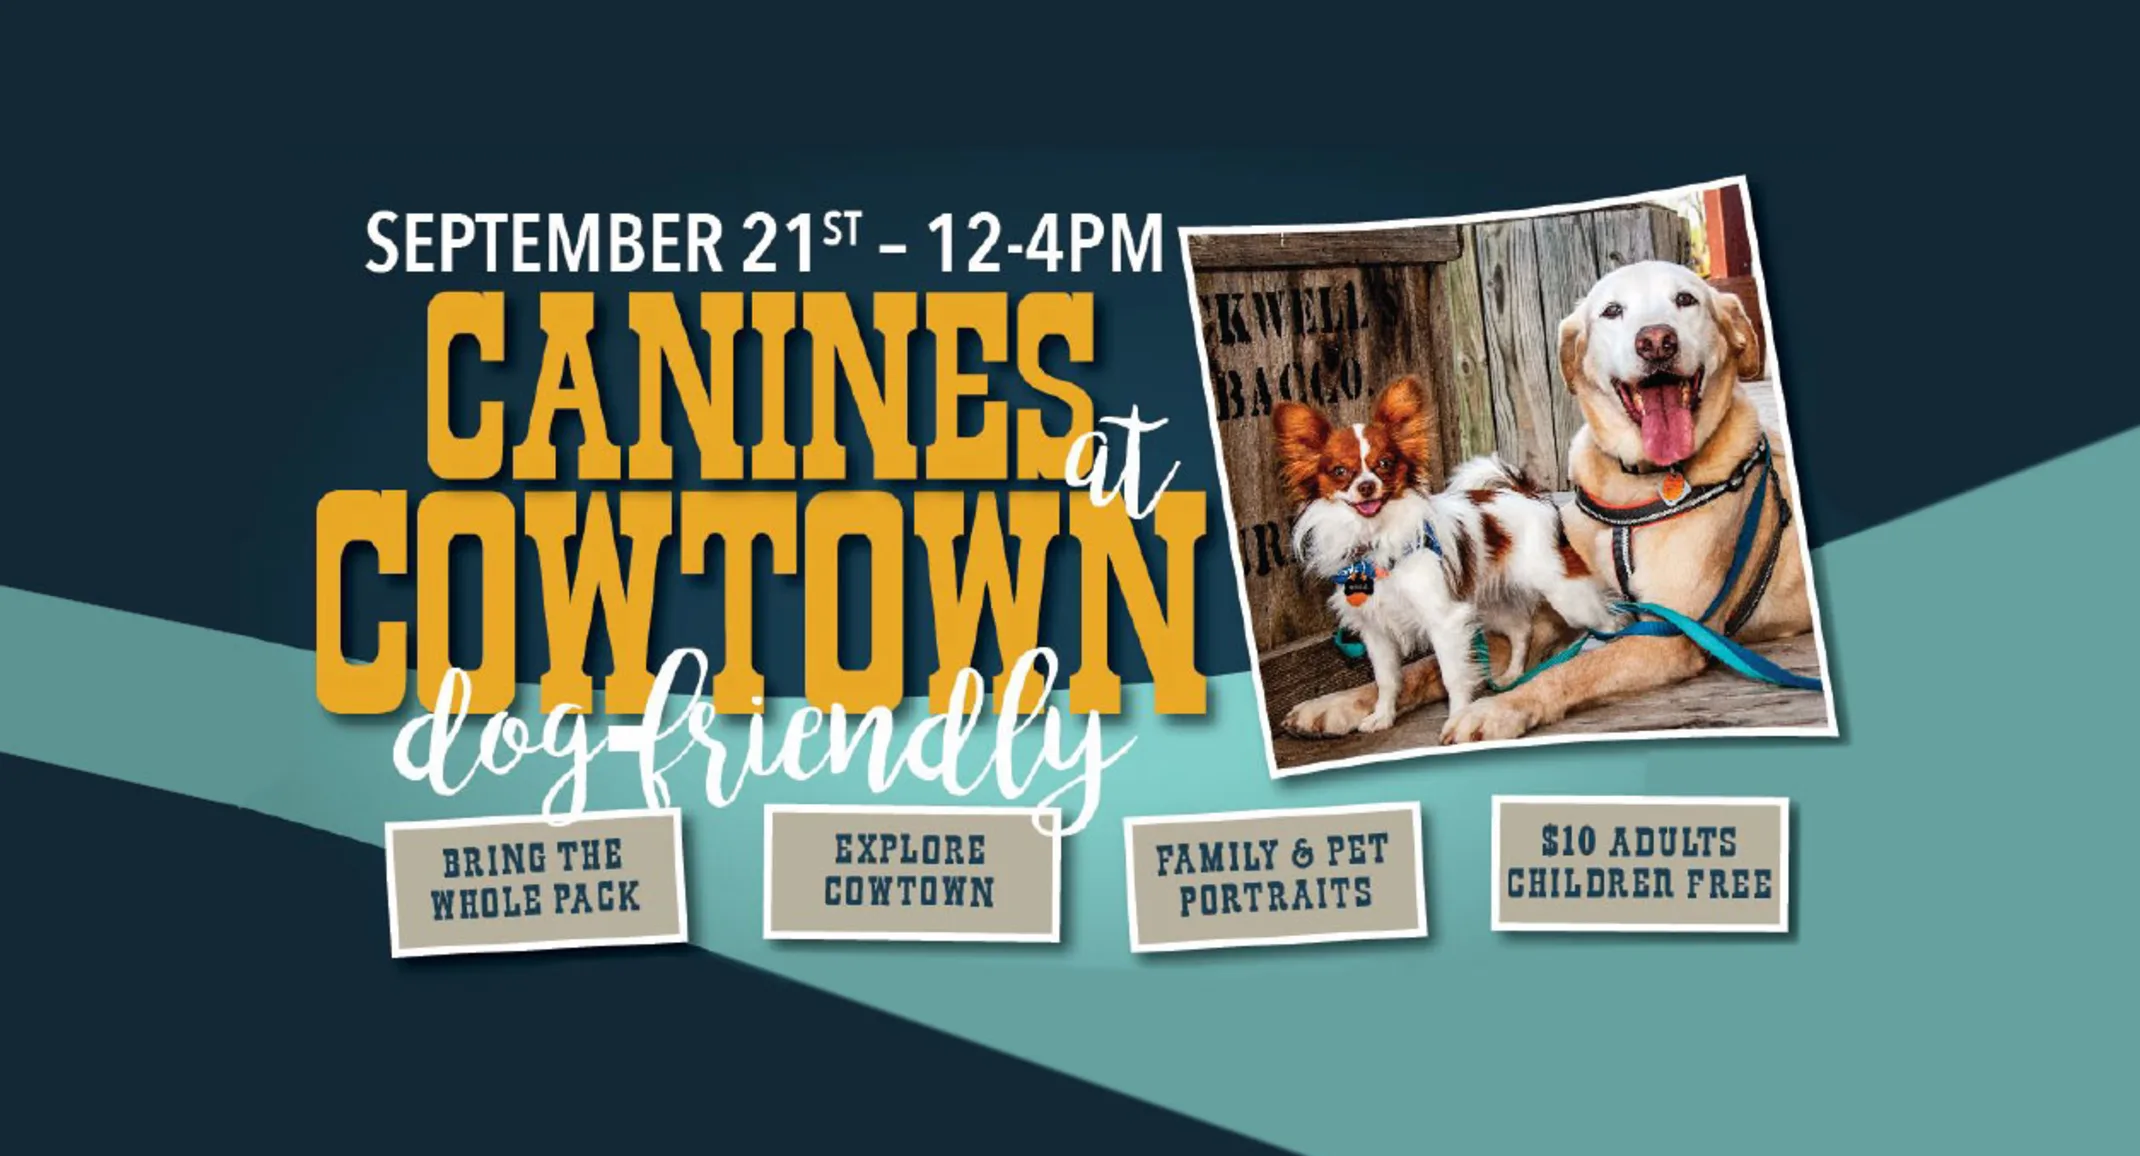 3rd Annual Canines At Cowtown Ad